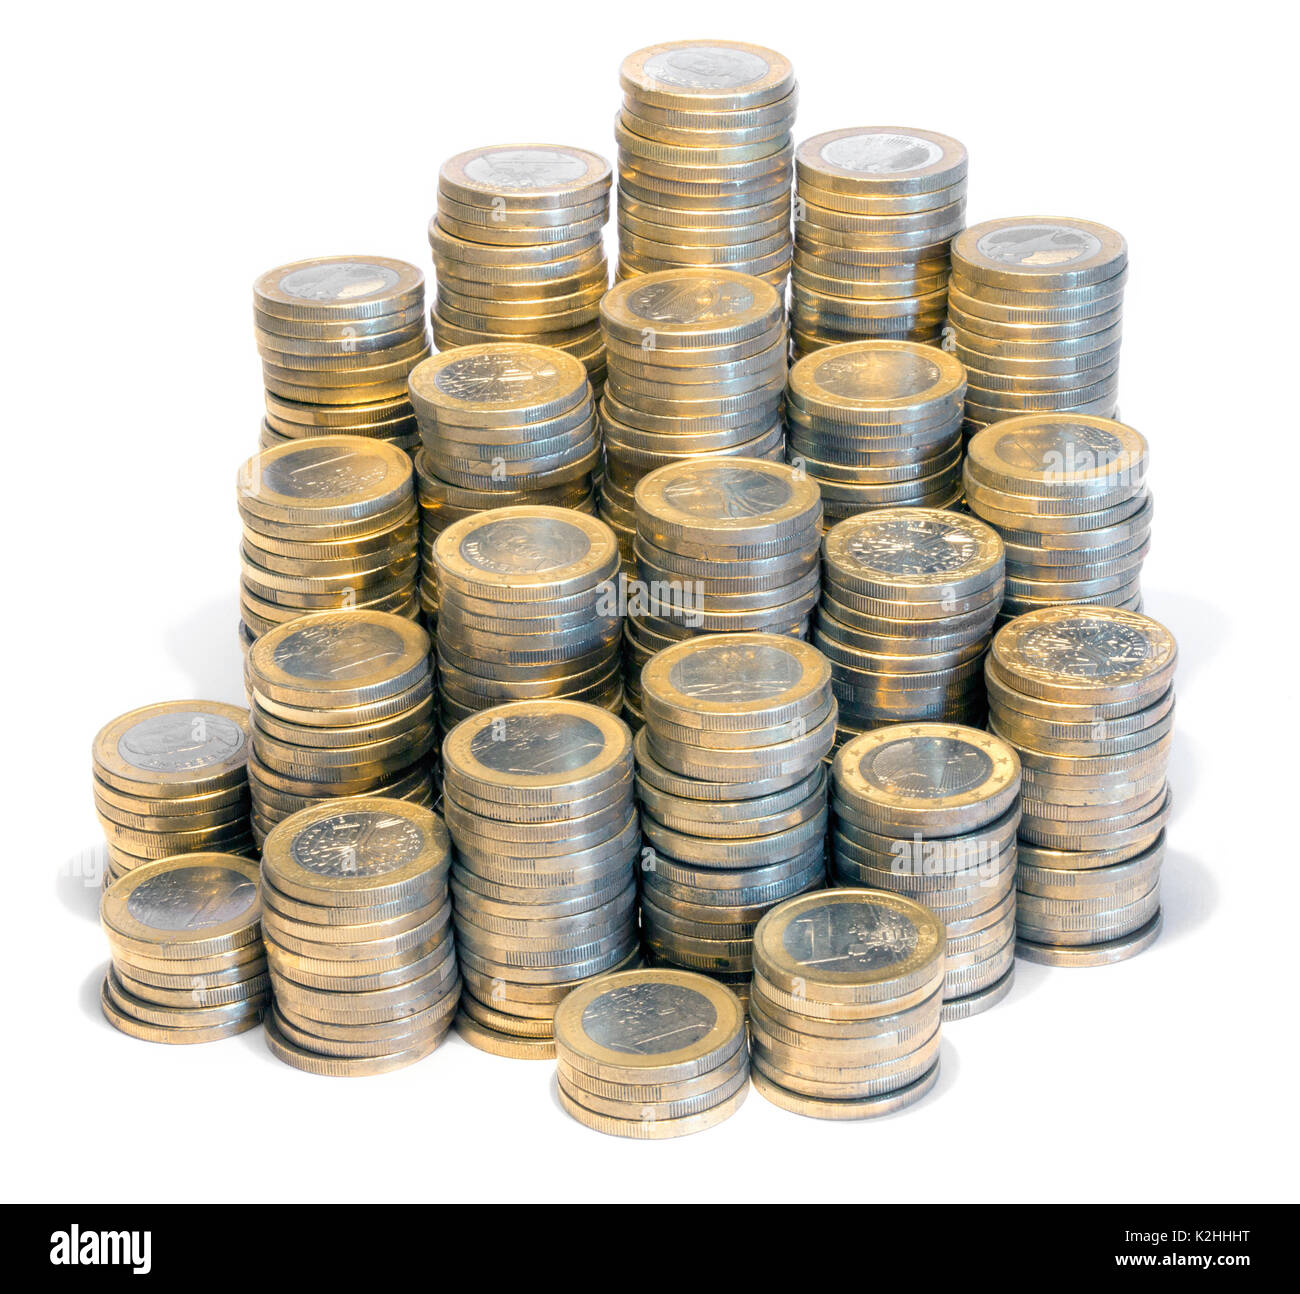 35,363 1 Euro Coin Images, Stock Photos, 3D objects, & Vectors